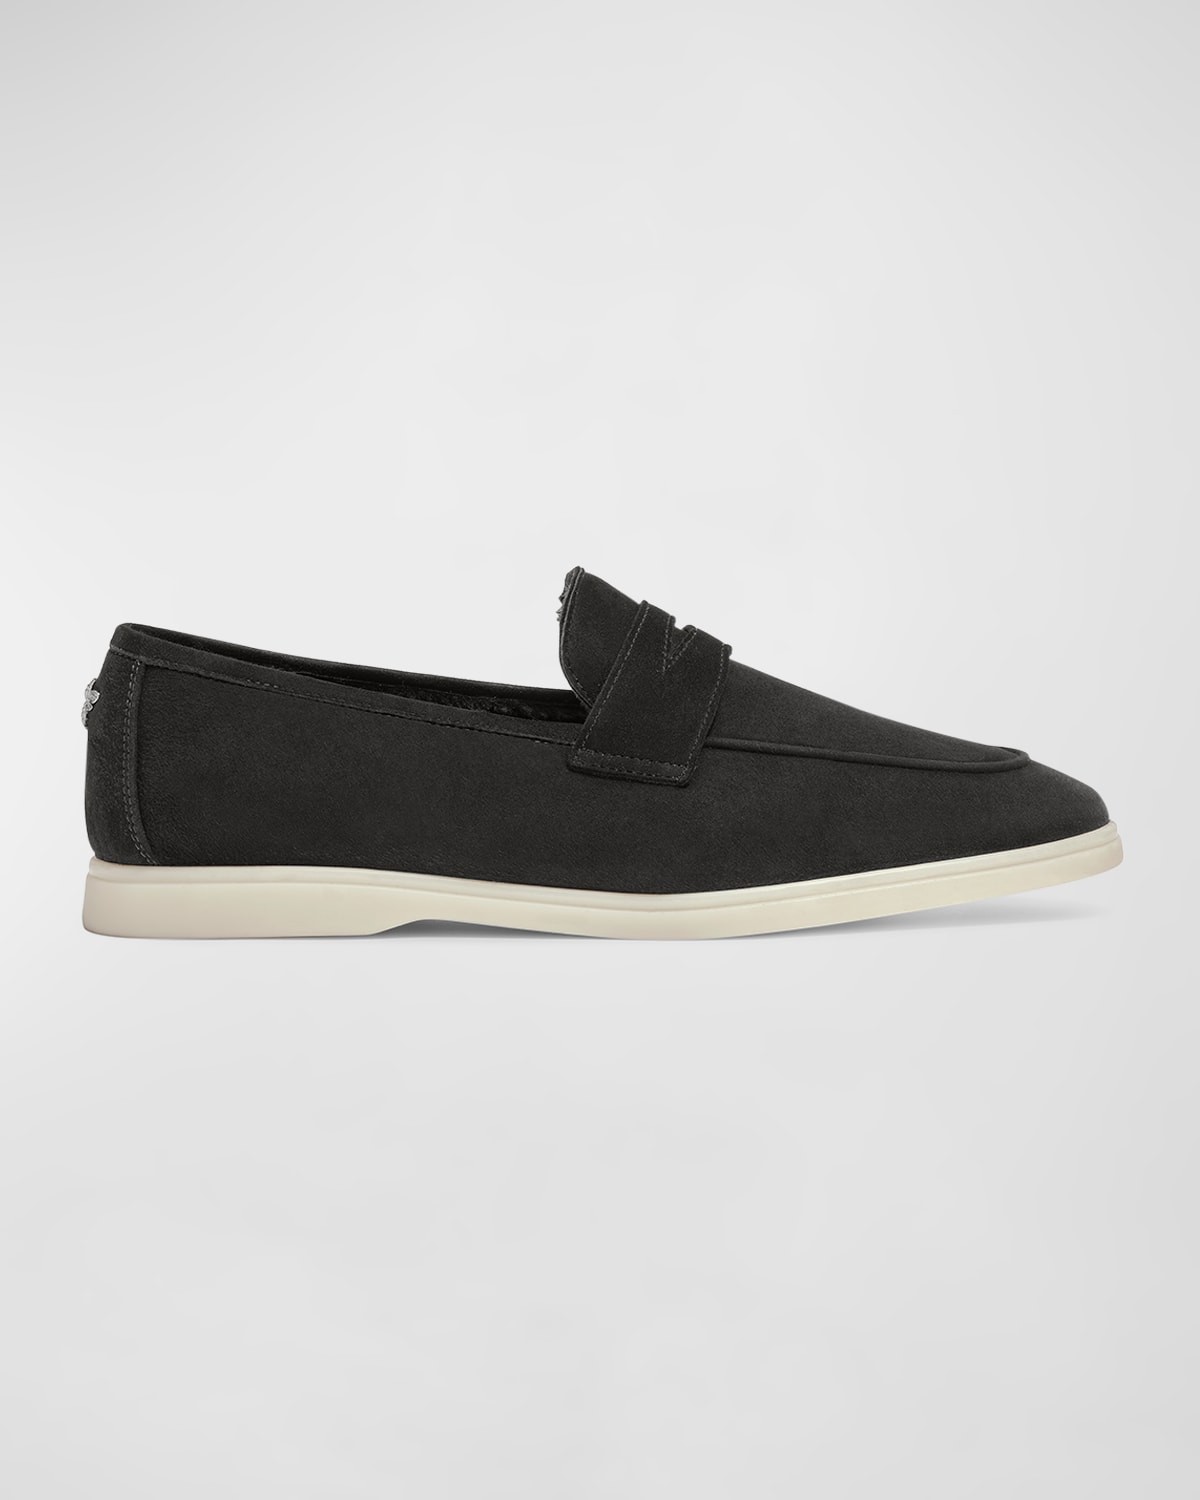 Bougeotte Meteorite Suede Shearling Penny Loafers